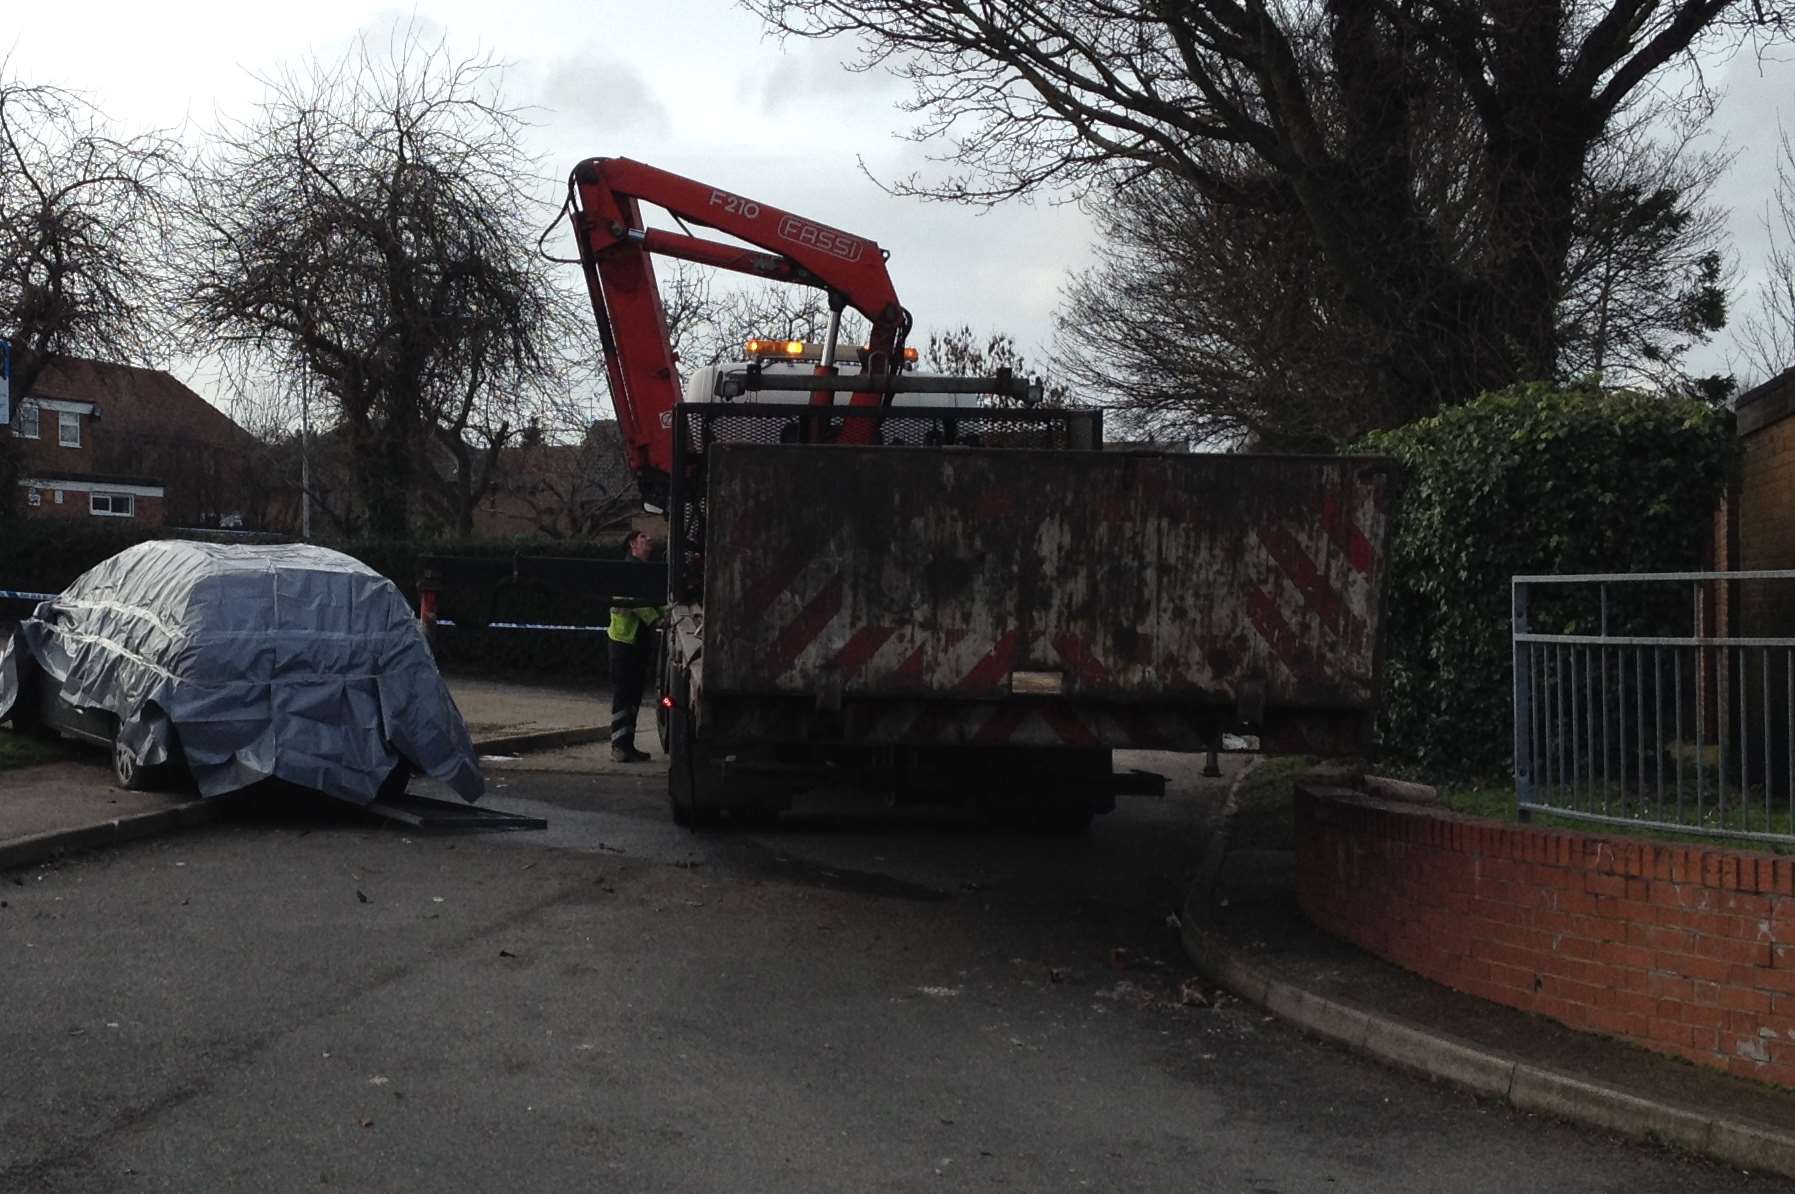 The stolen car plunged several feet onto this road in Gillingham